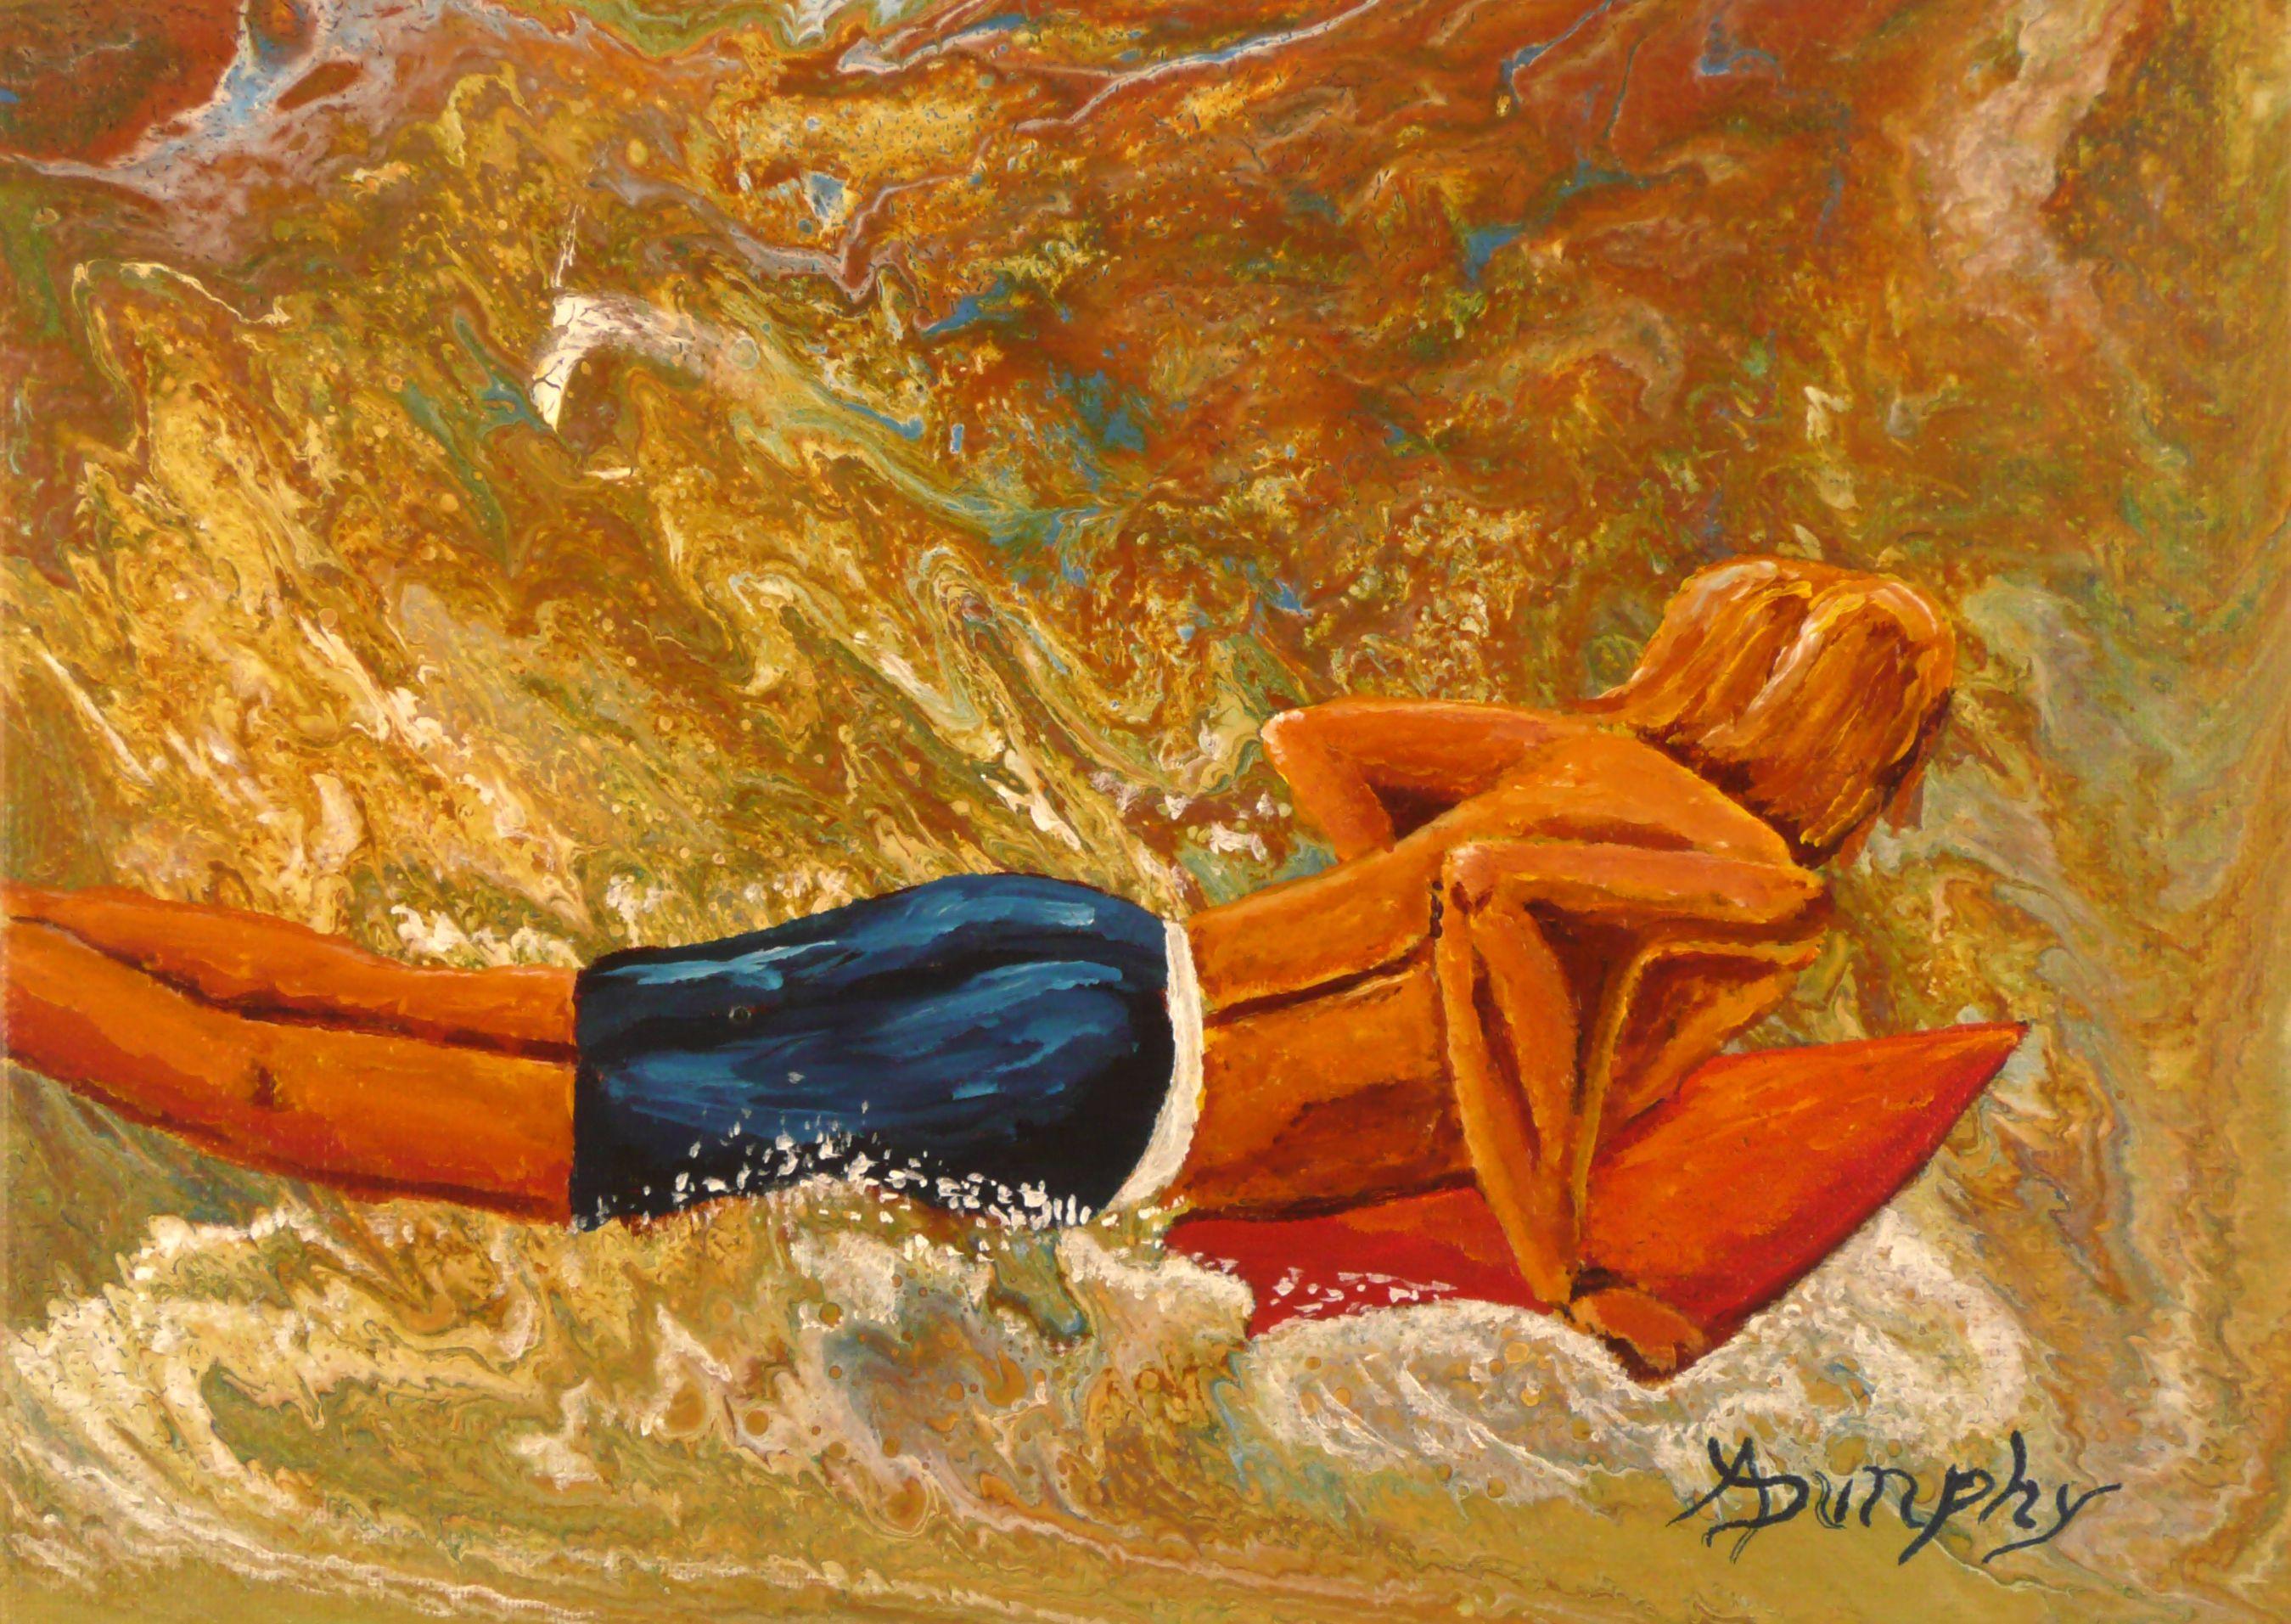 Surfer, Mixed Media on Canvas - Mixed Media Art by Anthony Dunphy